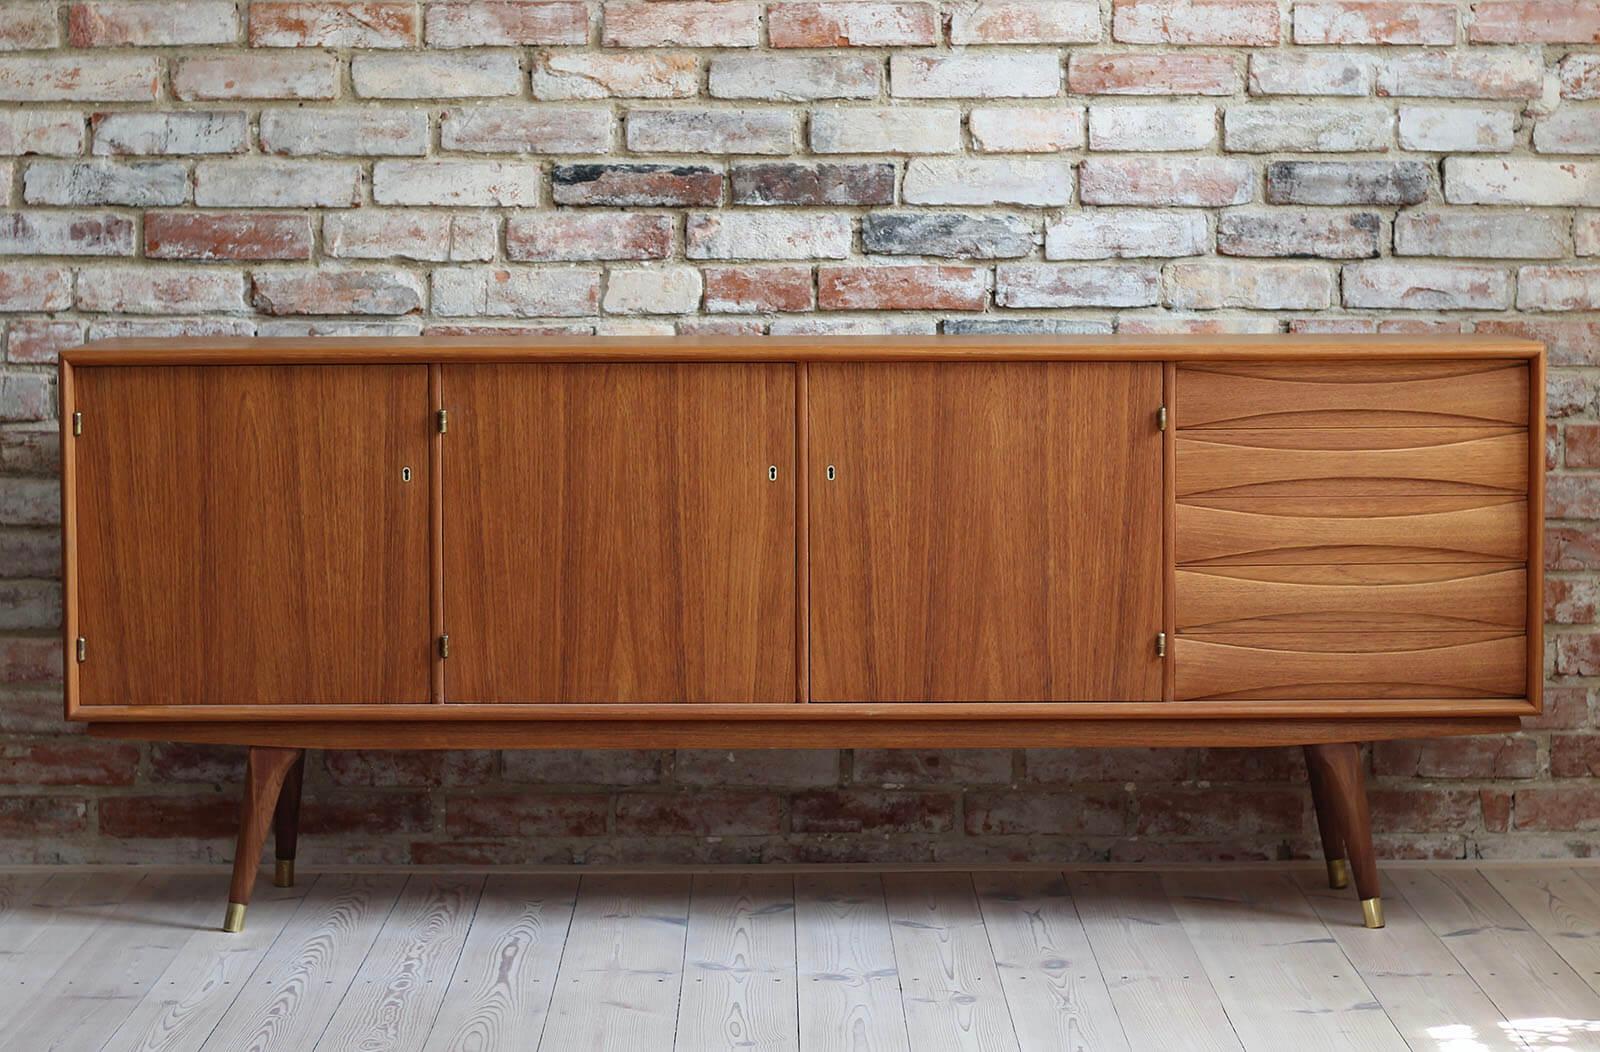 This beautiful teak sideboard was designed by Sven Andersen and manufactured in Norway in second half of the 1950s. The piece features three doors that reveal lots of storage space and five drawers in the section on the right. The sideboard features